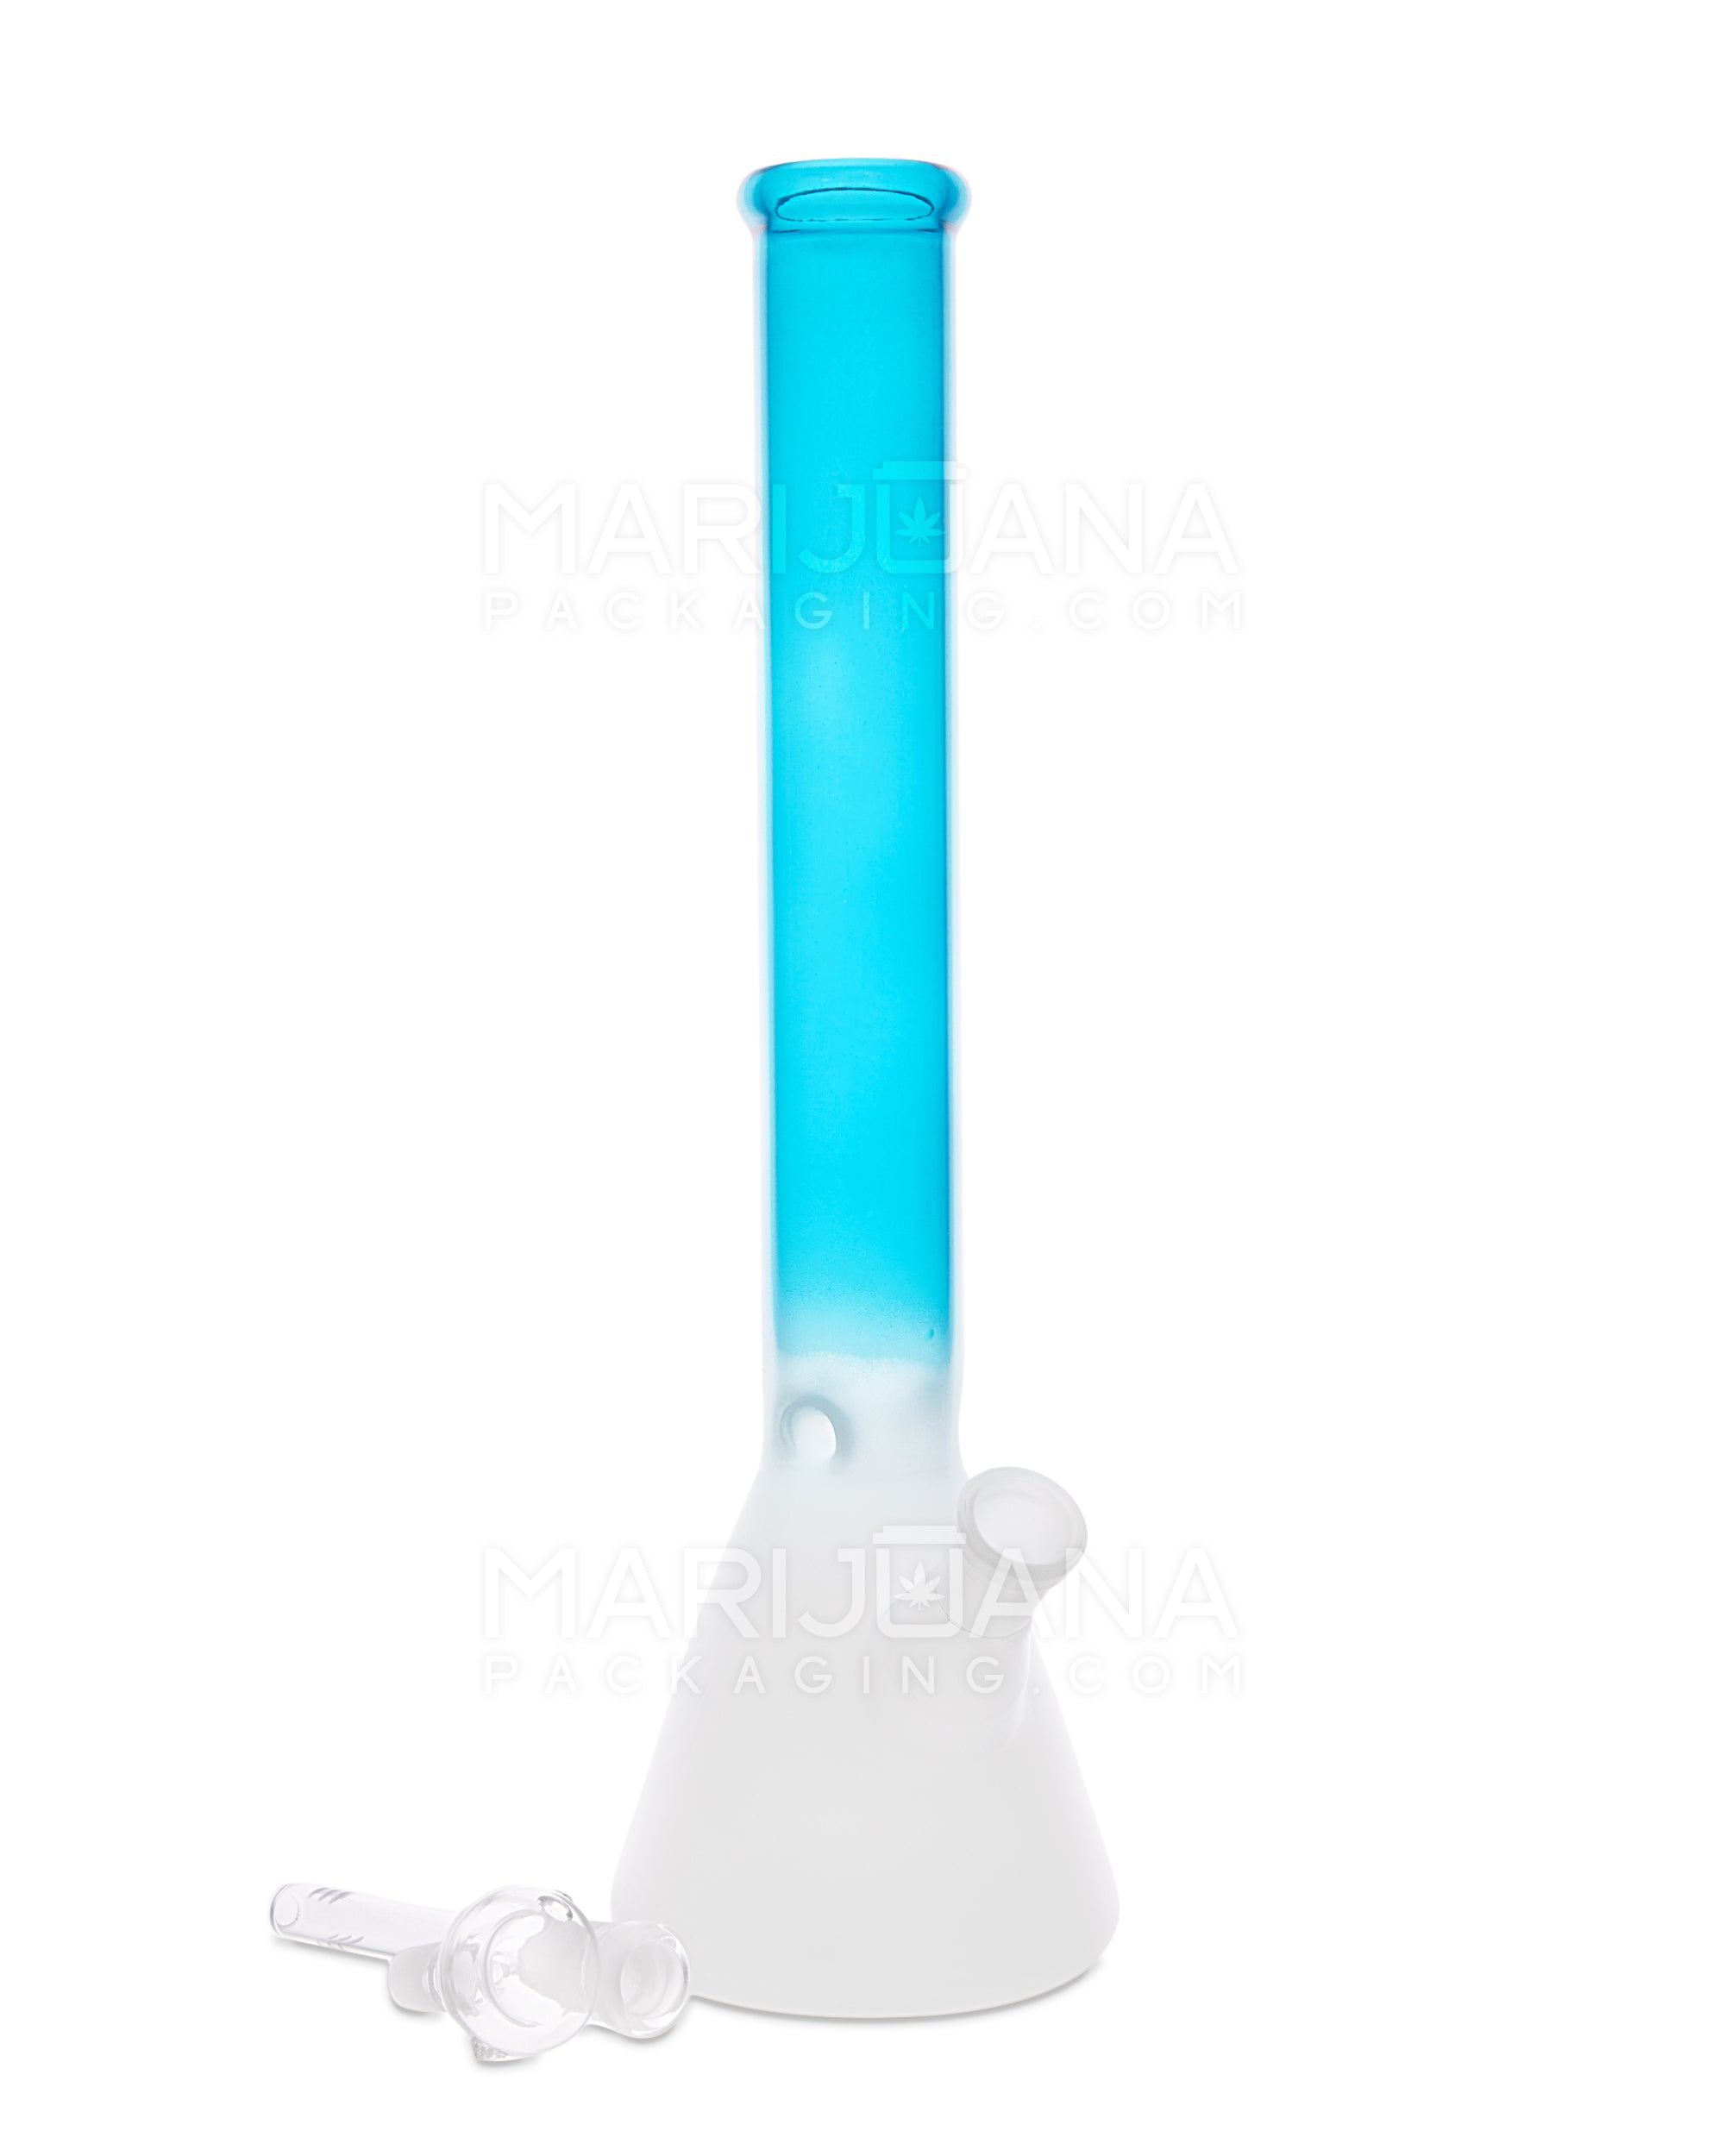 Straight Neck Glass Beaker Water Pipe w/ Ice Catcher | 14in Tall - 14mm Bowl - Blue/White